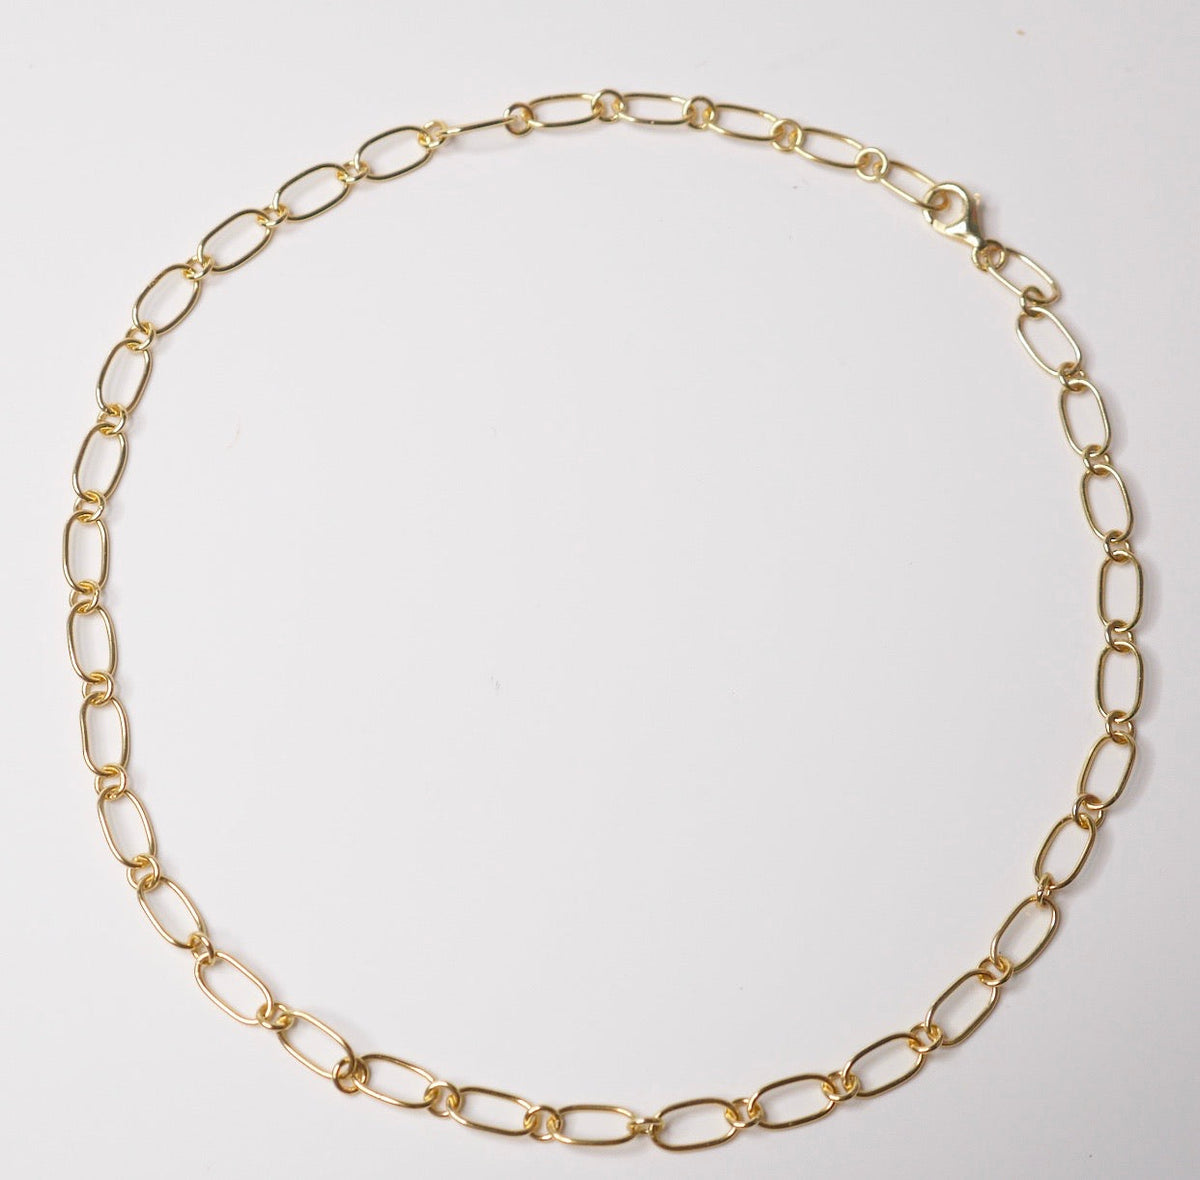 Paperclip Style Choker Necklace, 18k Gold Plated .925 Sterling Silver Short Necklace